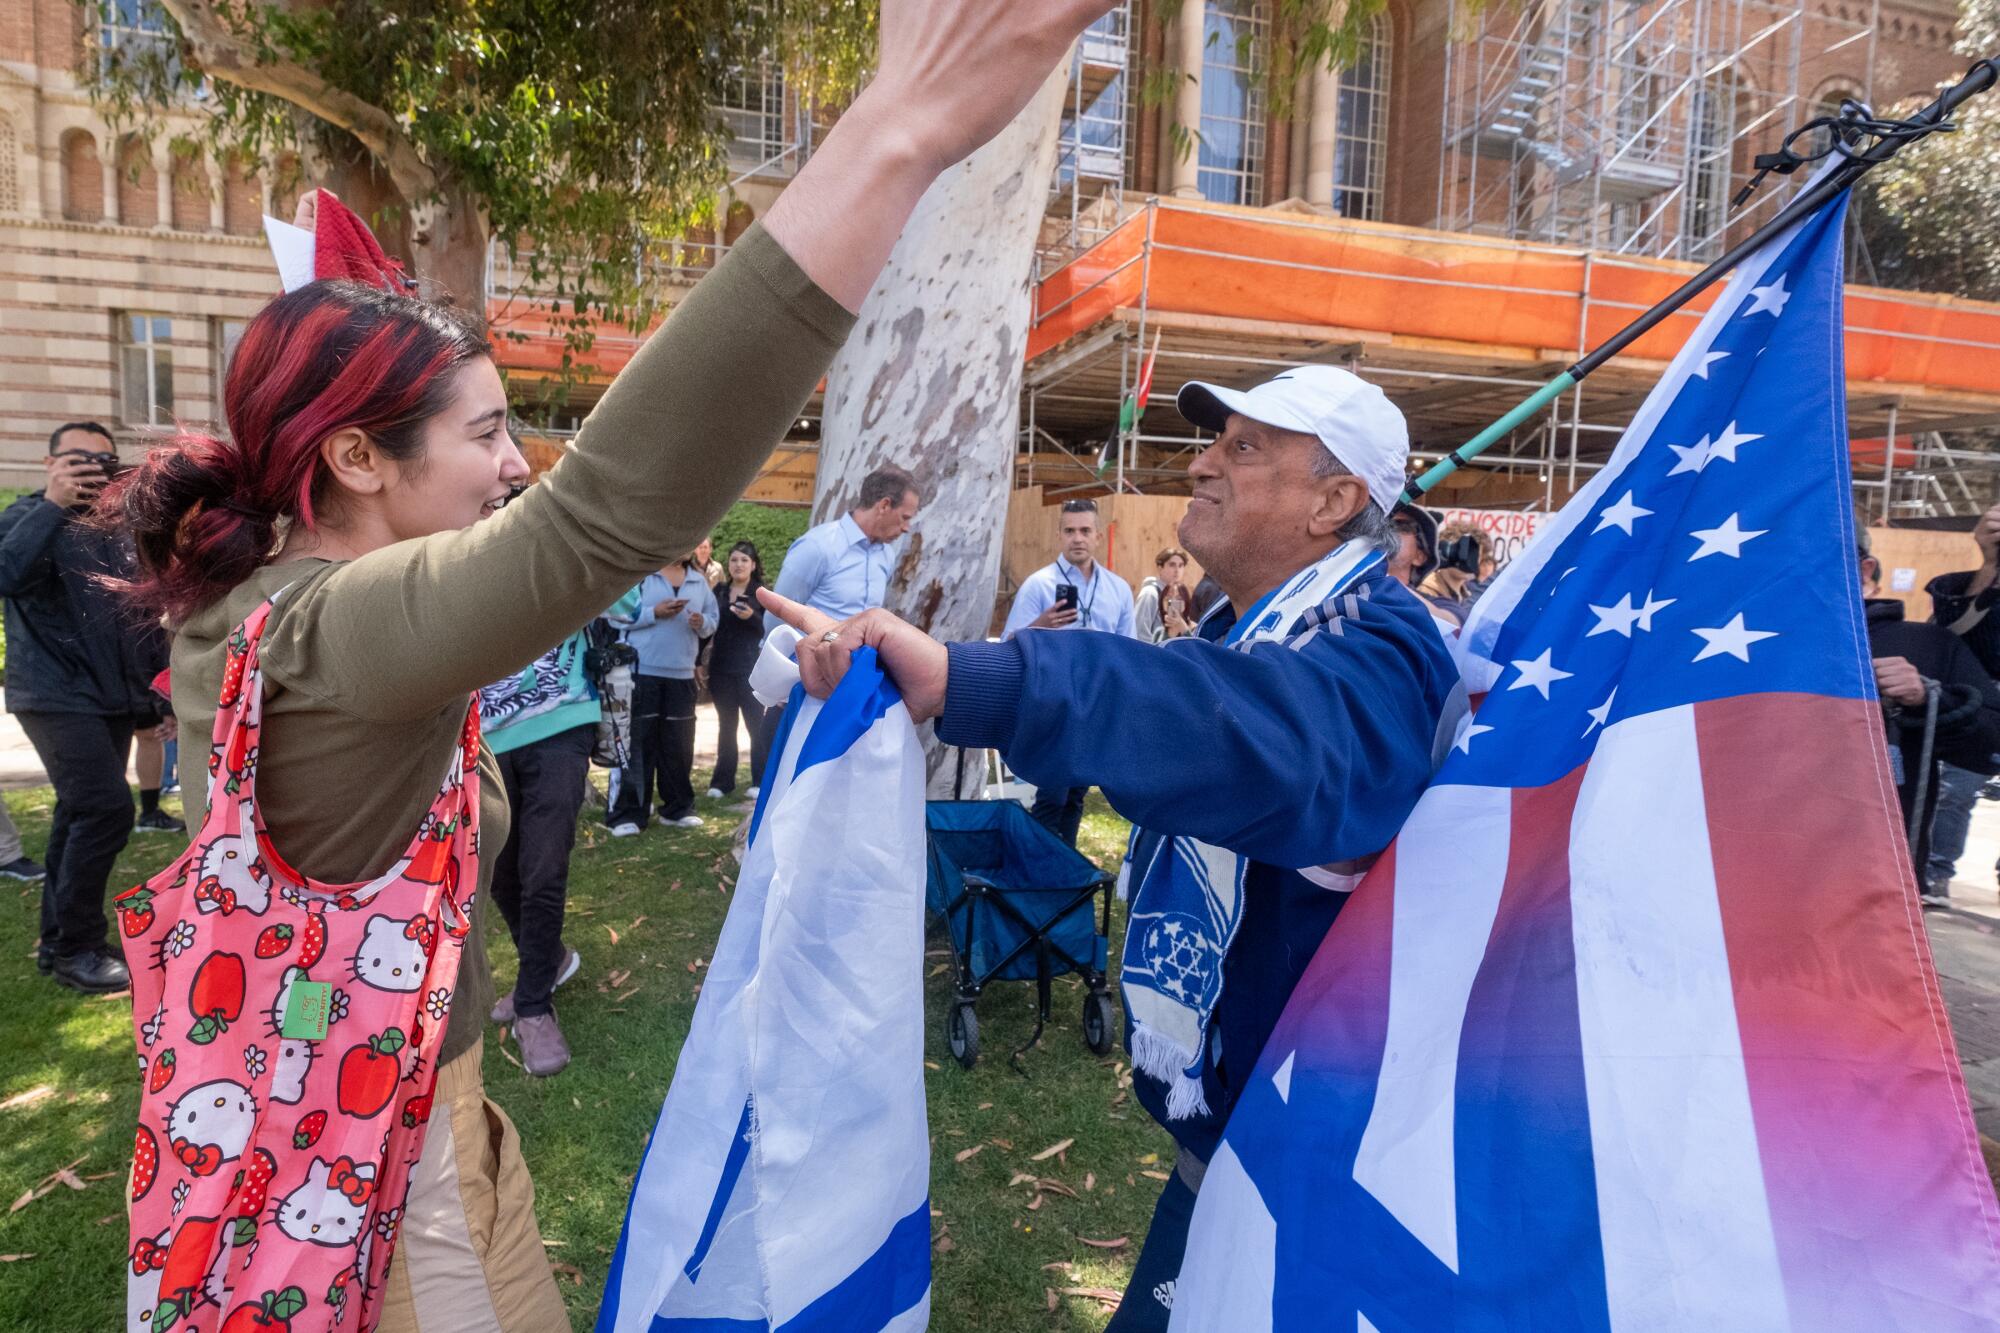 Robert Shaman, right, faces off with with a pro-Palestine protester near an encampment on the campus of UCLA.